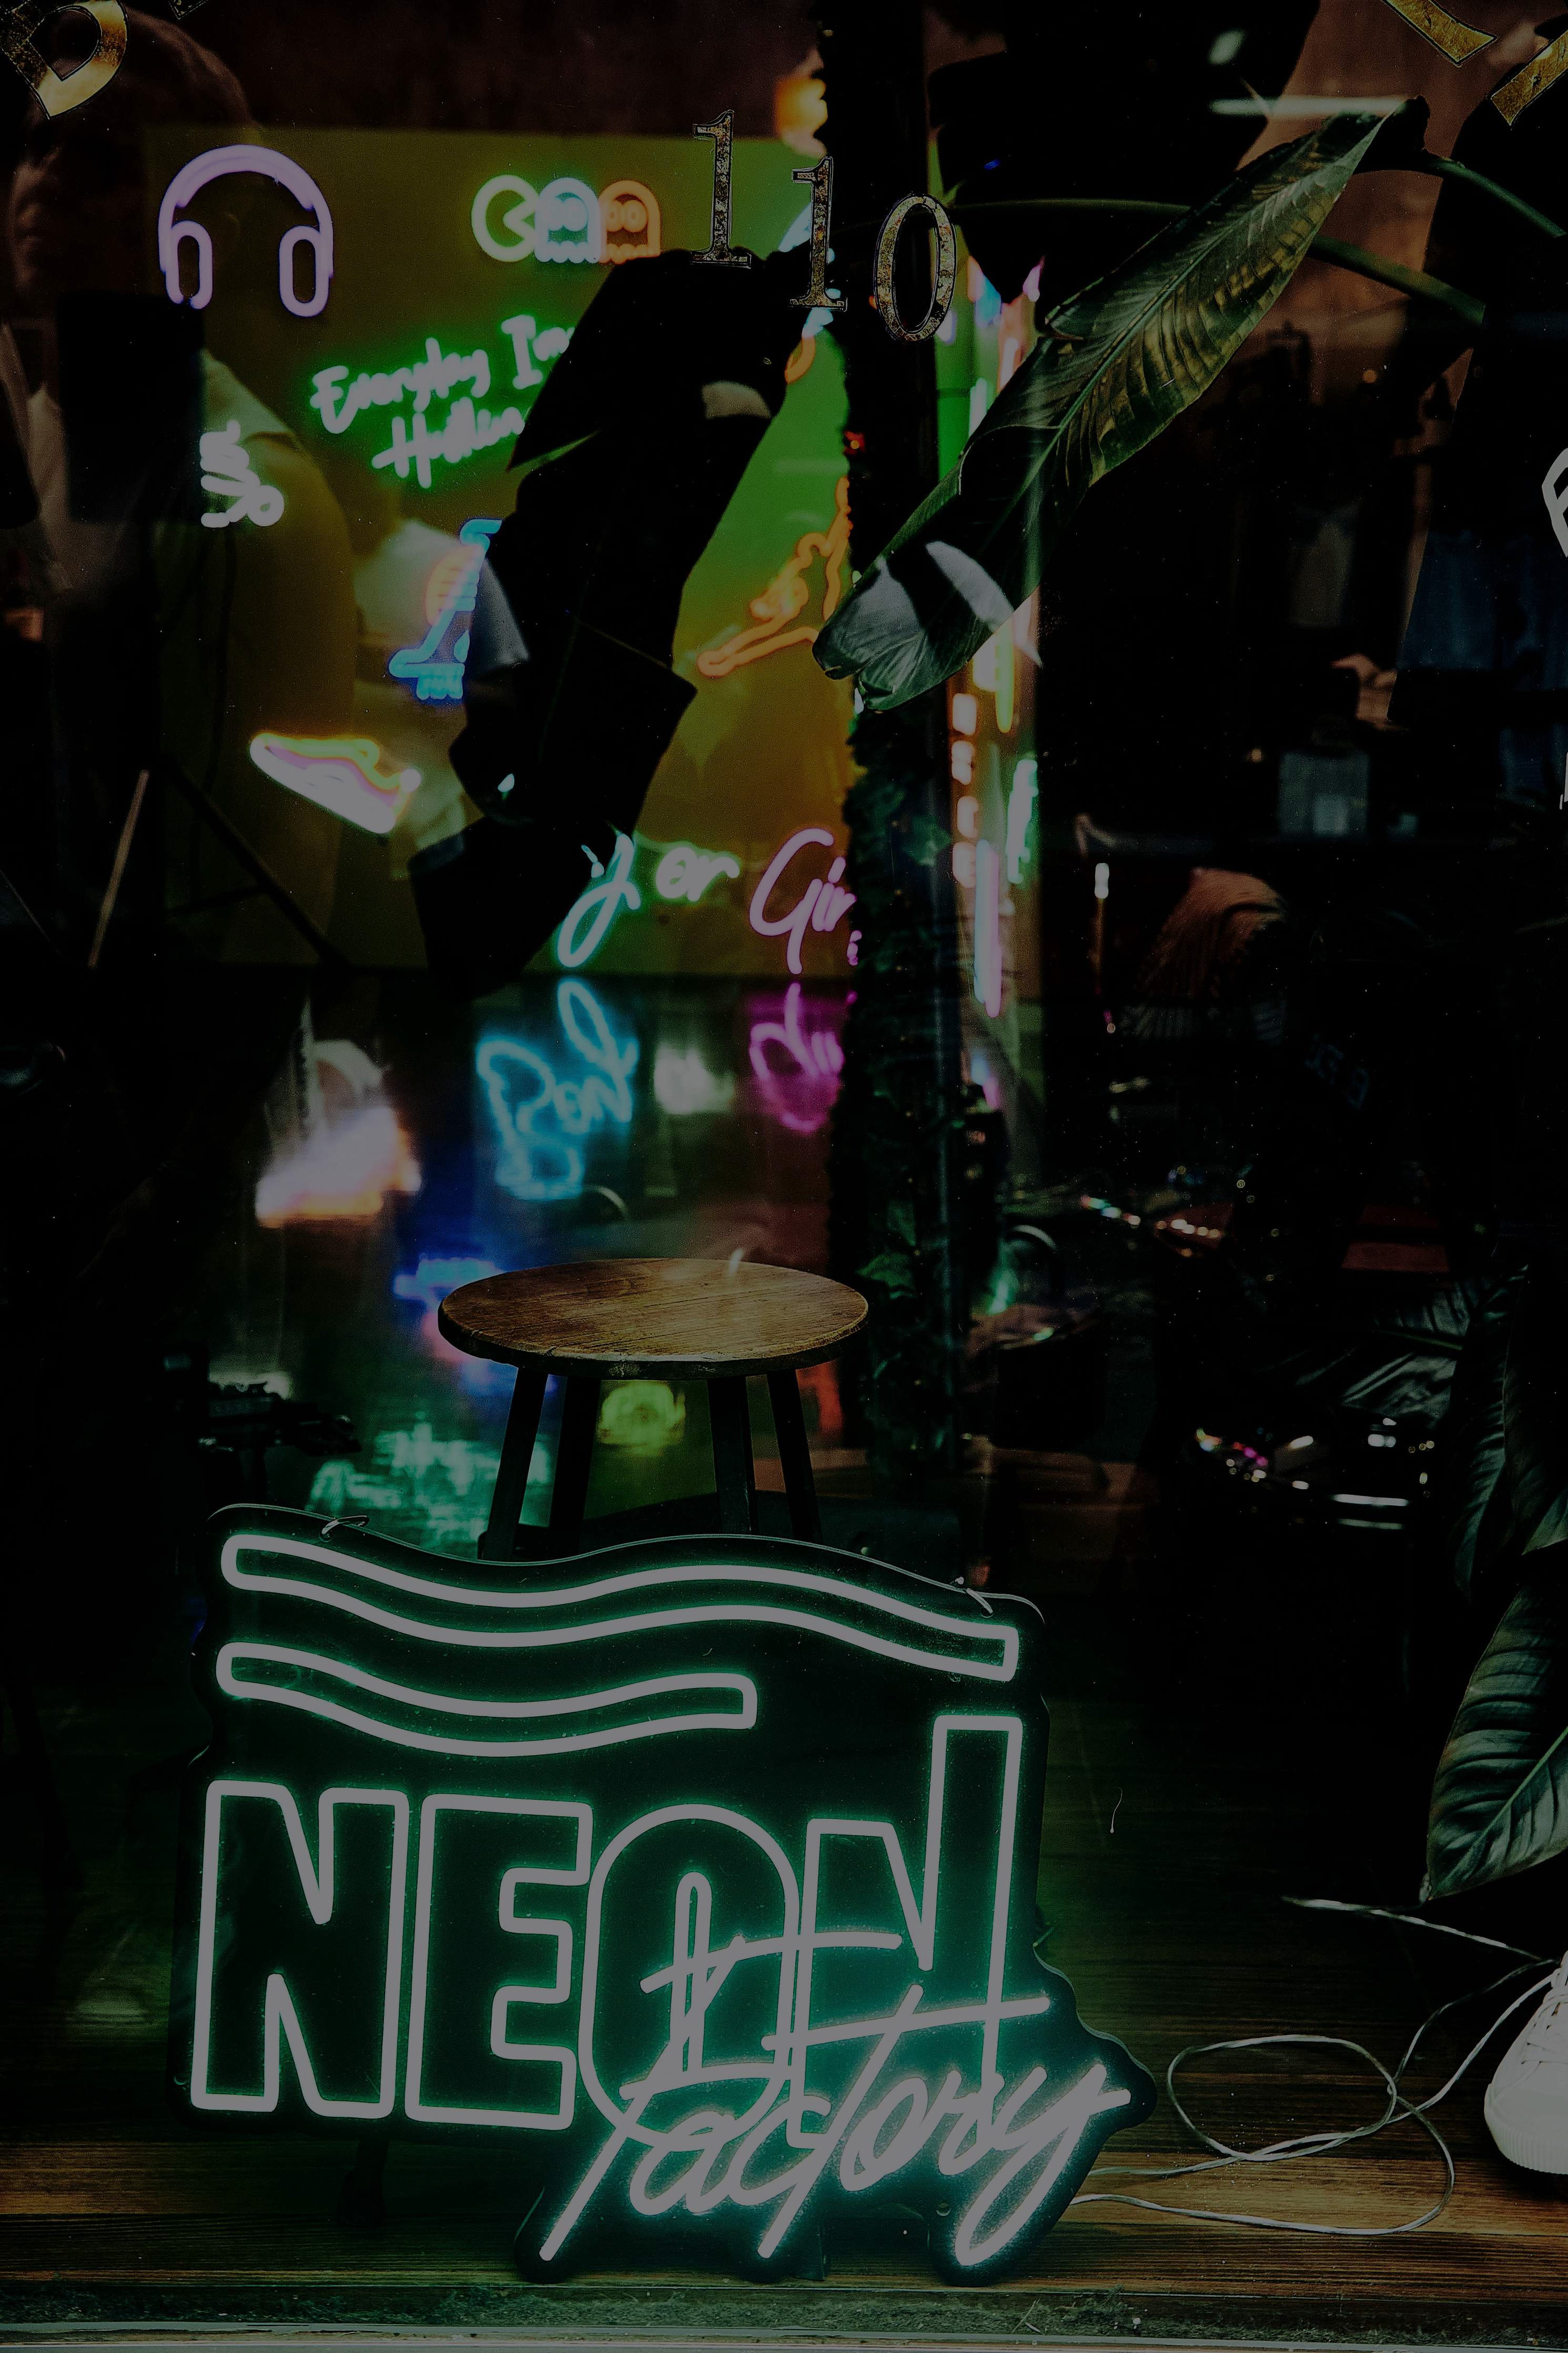 The Neon Factory